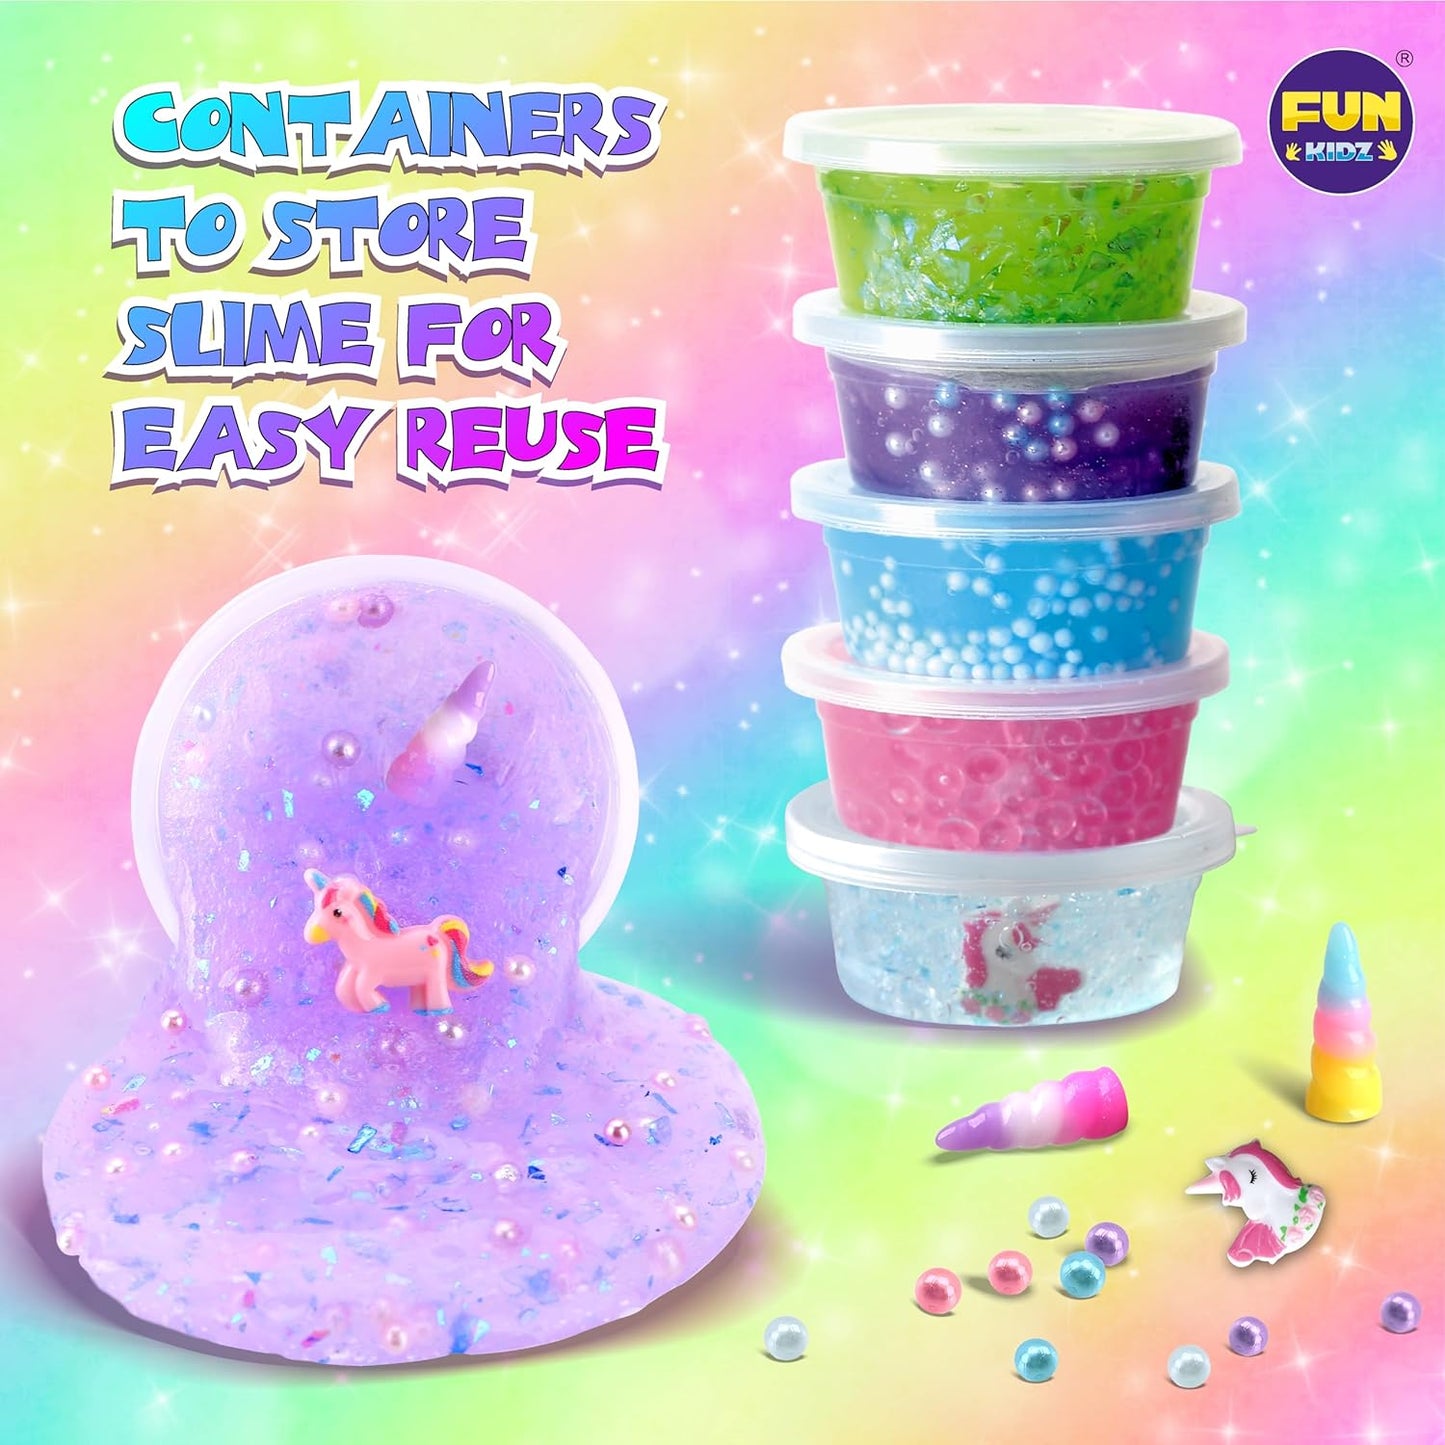 Fluffy Unicorn Slime Kit for Girls, Funkidz Cloud Slime Gift for Ages 6+ Kids Fun Slime Making Kit Awesome Craft Toy Birthday Present Ideas